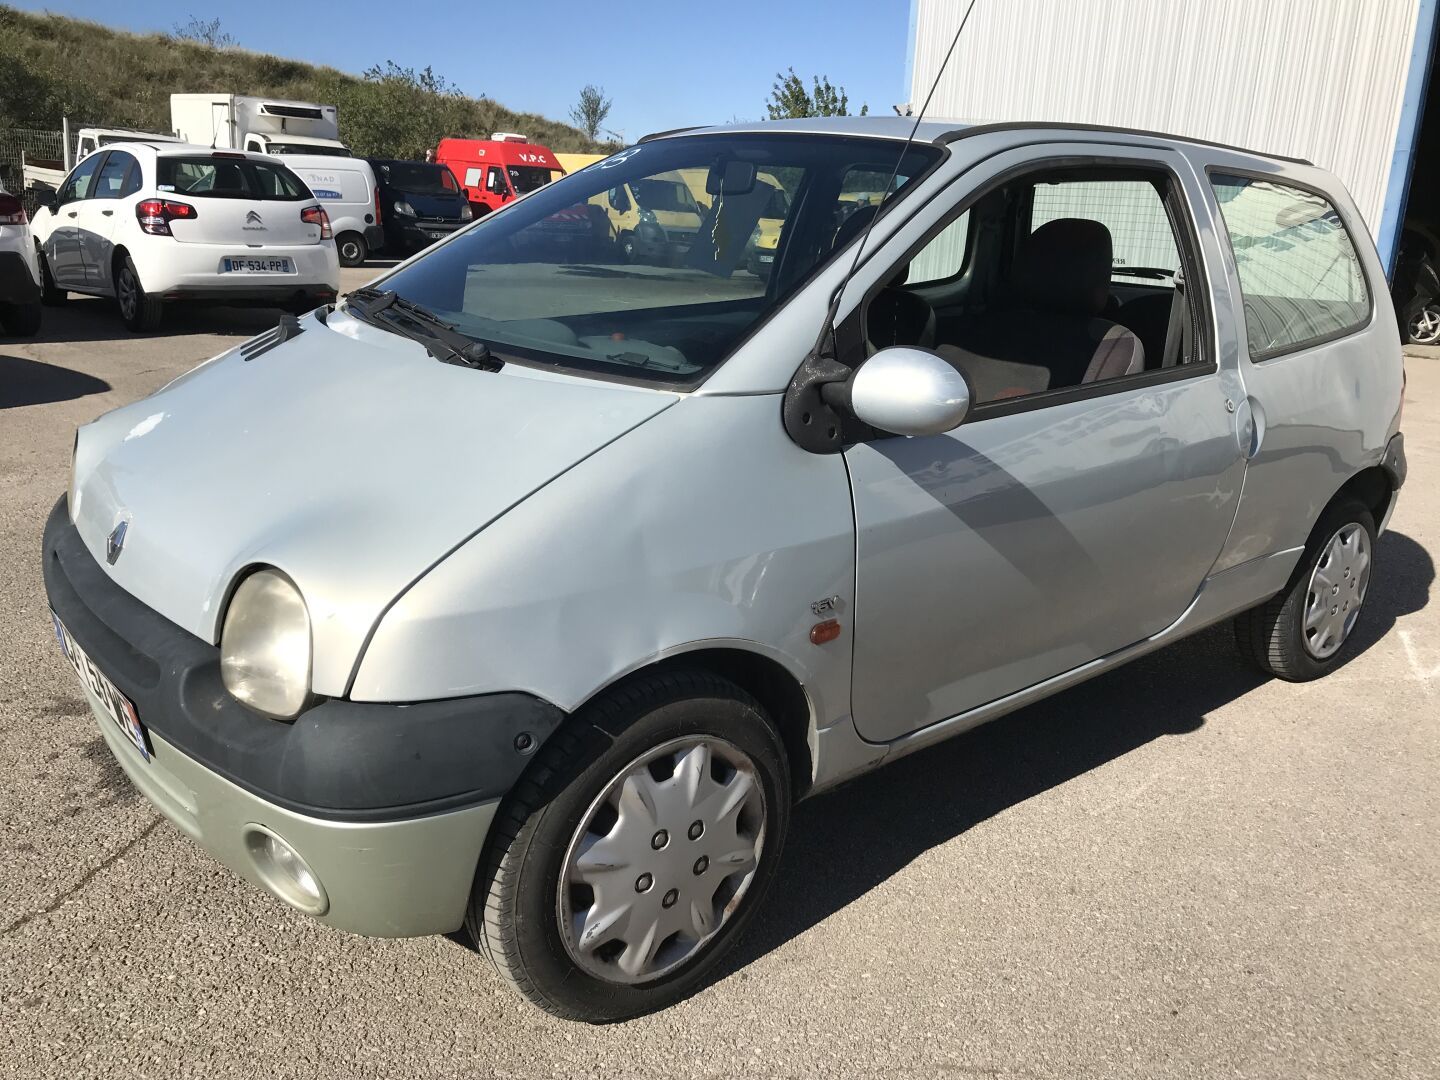 Null TWINGO 1.2i 16V 75ch
VP RENAULT TWINGO 1.2i 16V 75ch EXPR 16S
Carrosserie :&hellip;